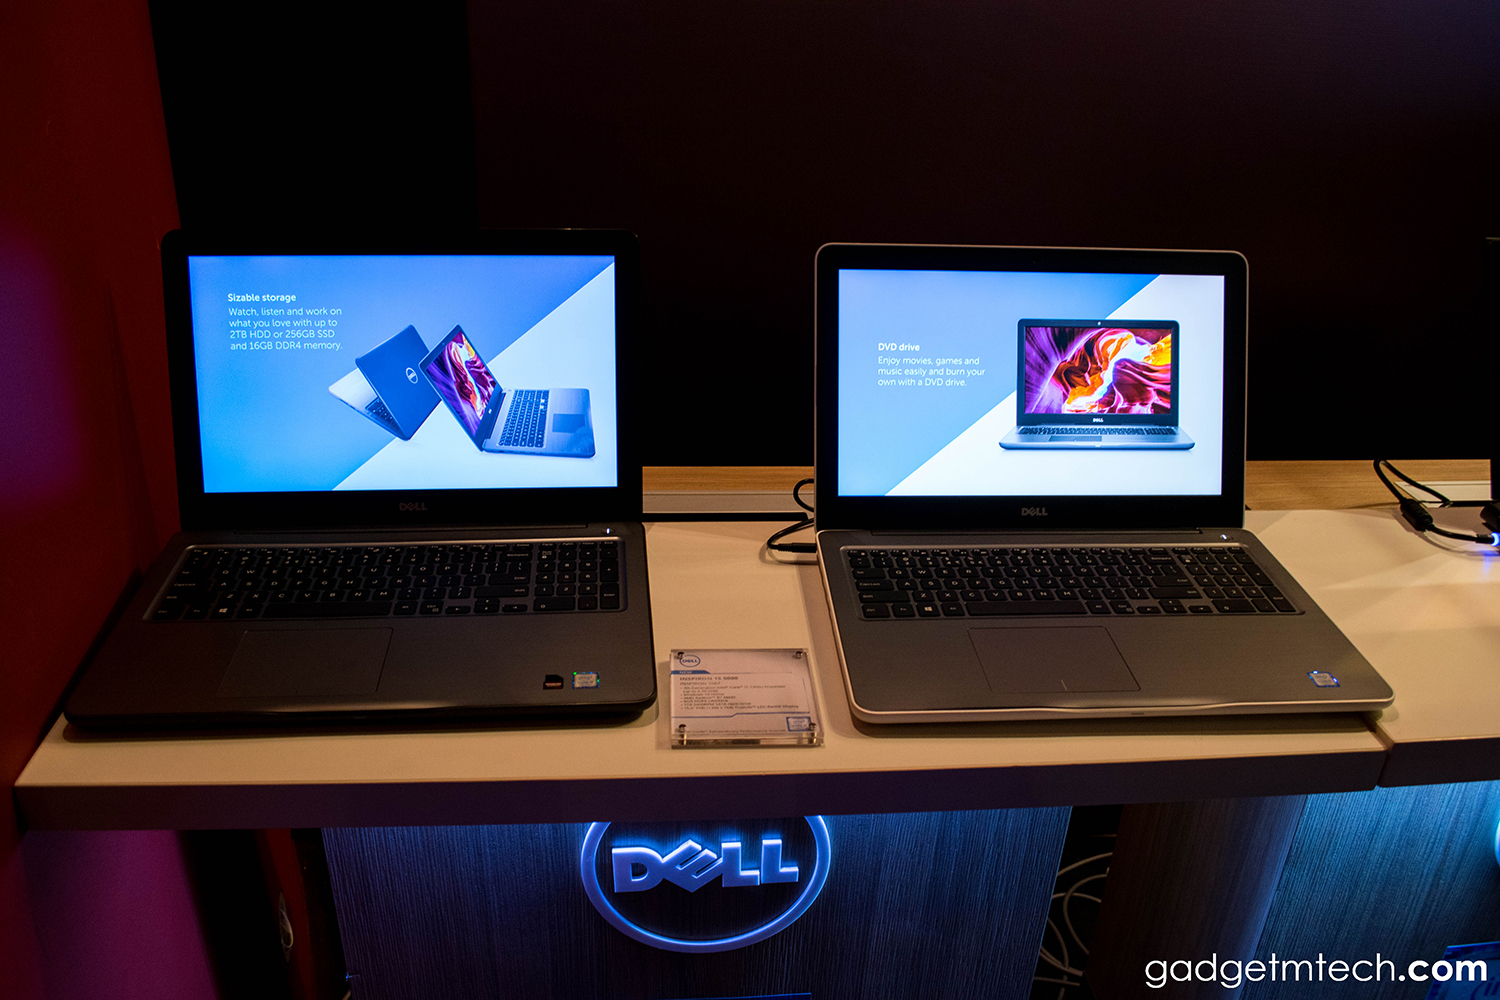 Dell introduces new Inspiron laptops and XPS Tower